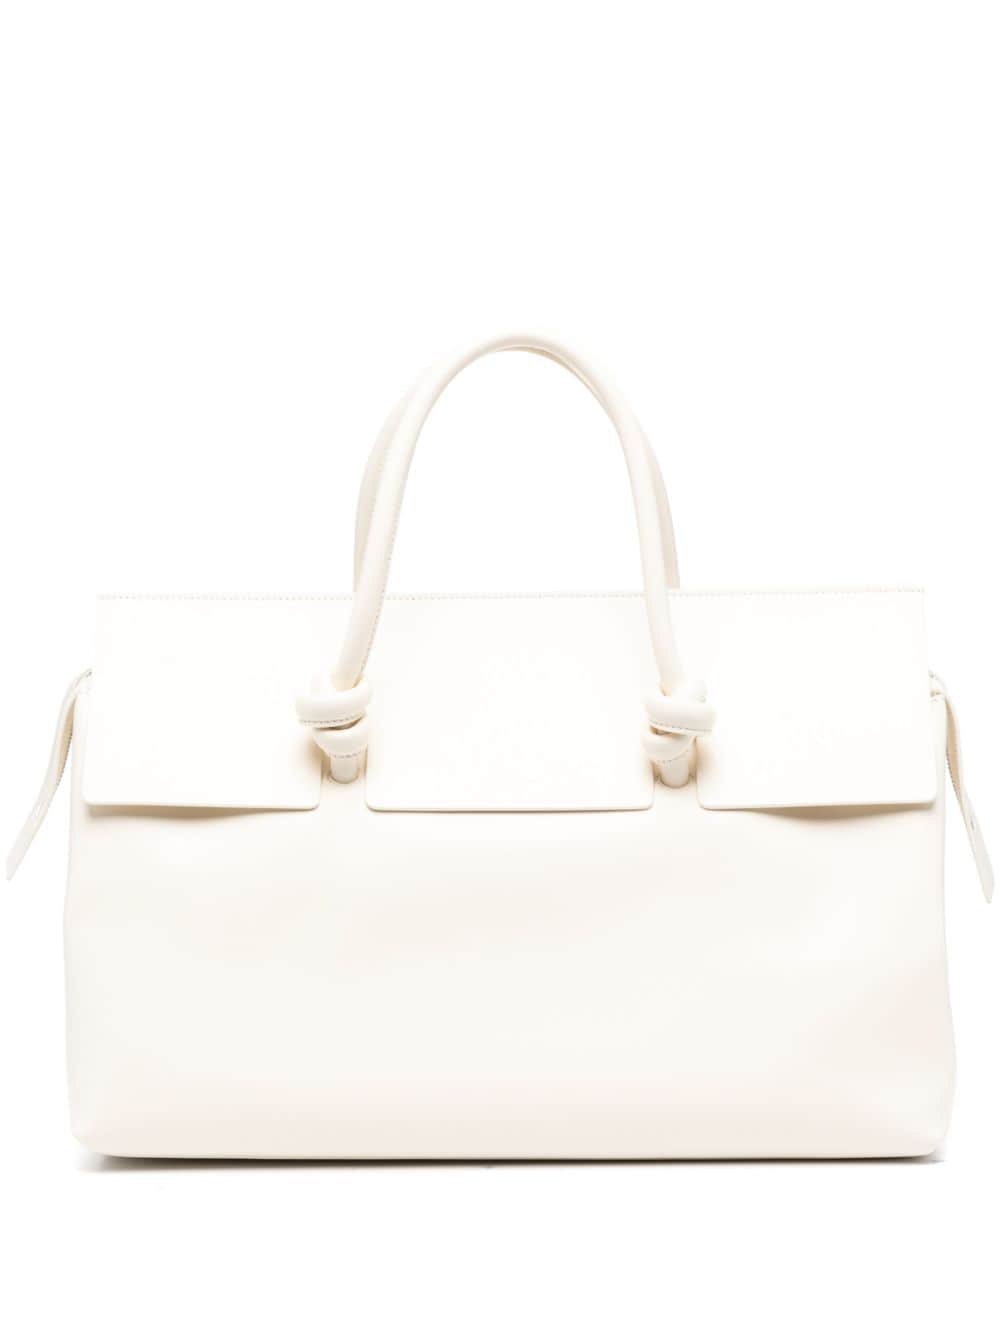 Jil Sander Knot Leather Tote Bag In Nude